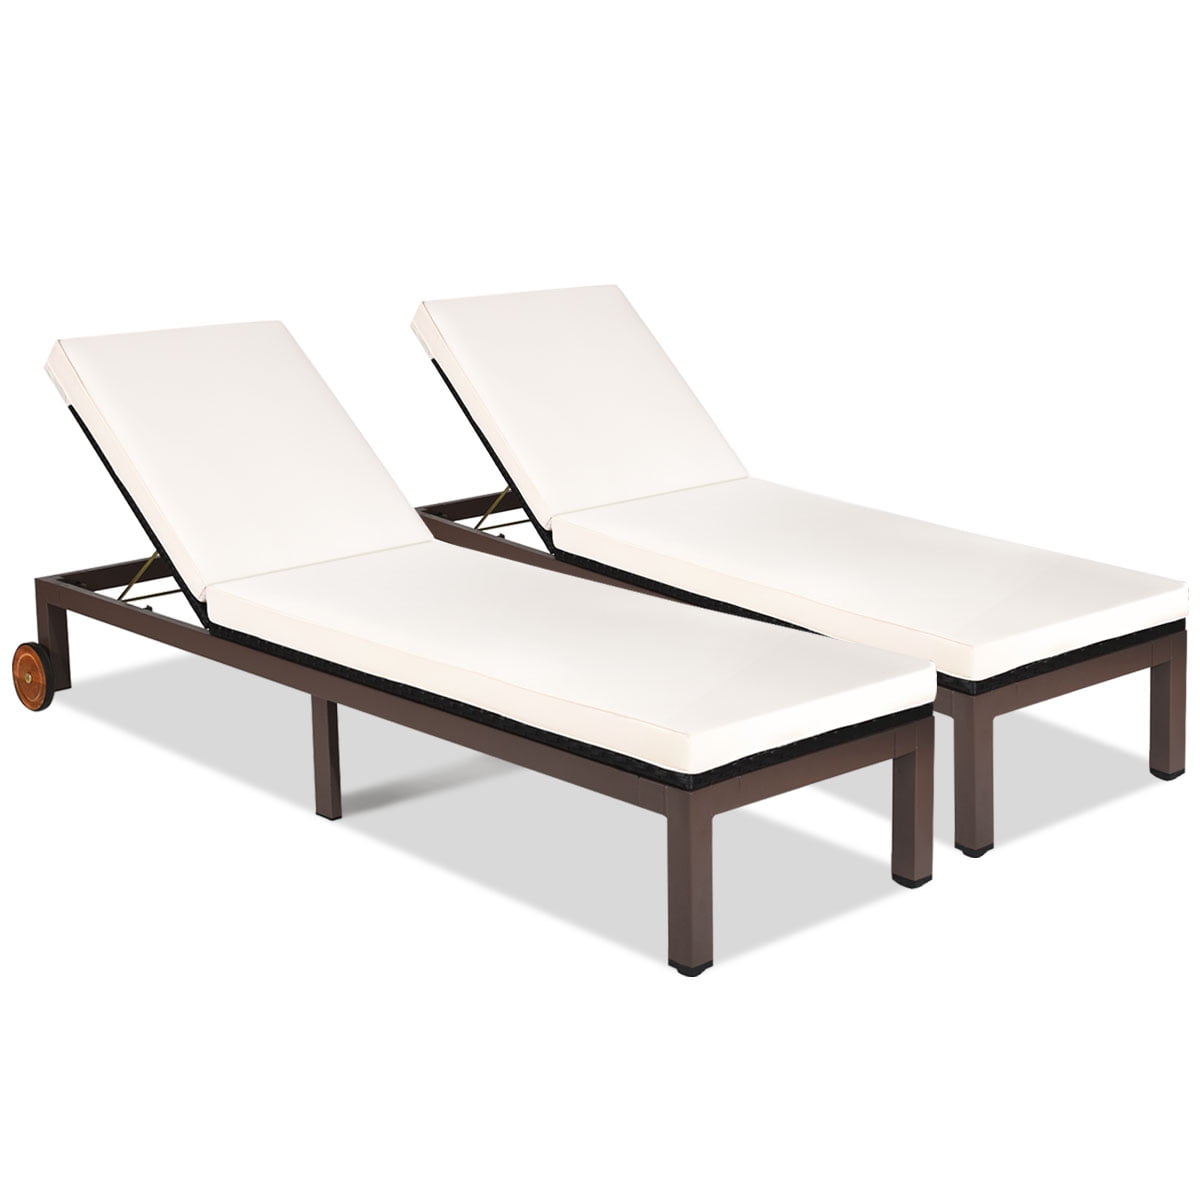 Topbuy Cushioned Rattan Outdoor Chaise Lounge - Set of 2 Beige